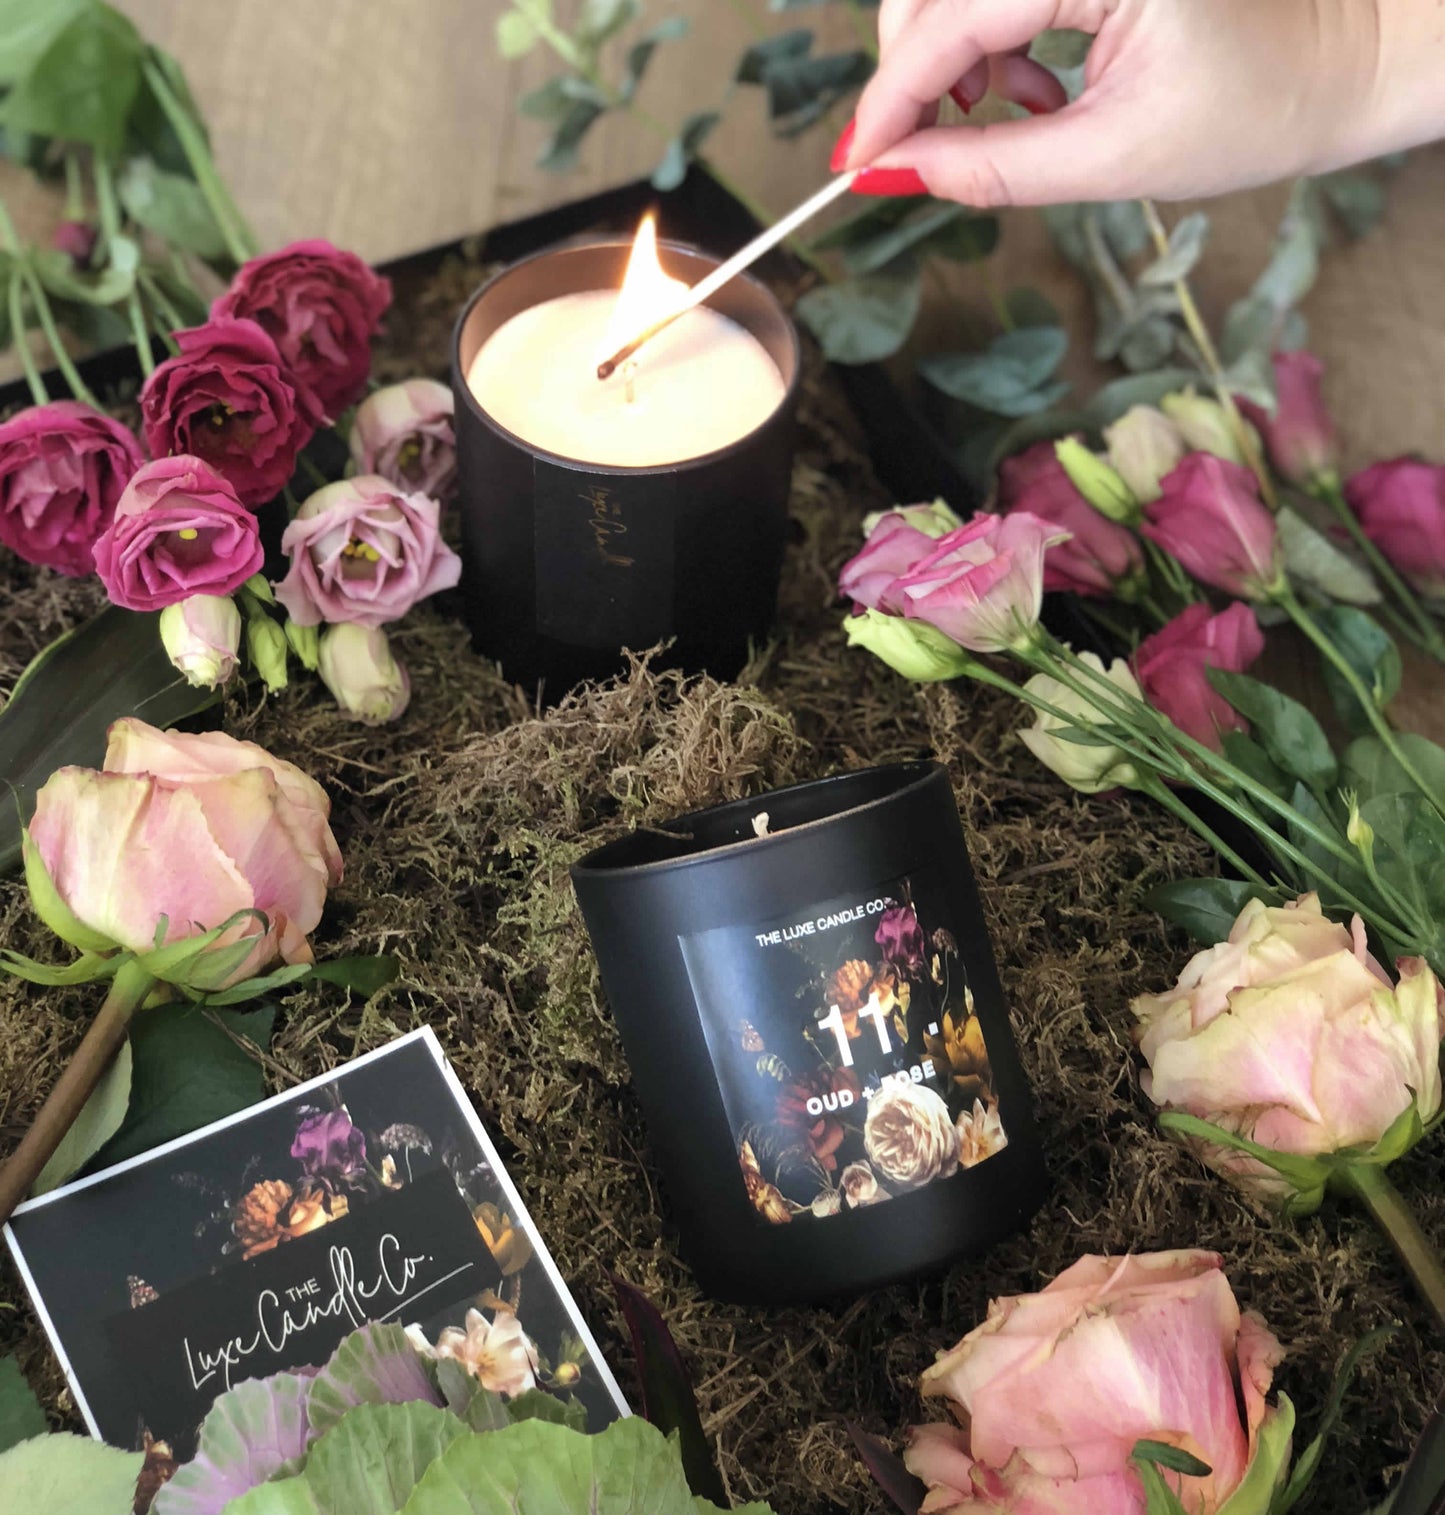 SCENTED CANDLE . OUD + ROSE . MAXIMALIST FLORAL PRINT